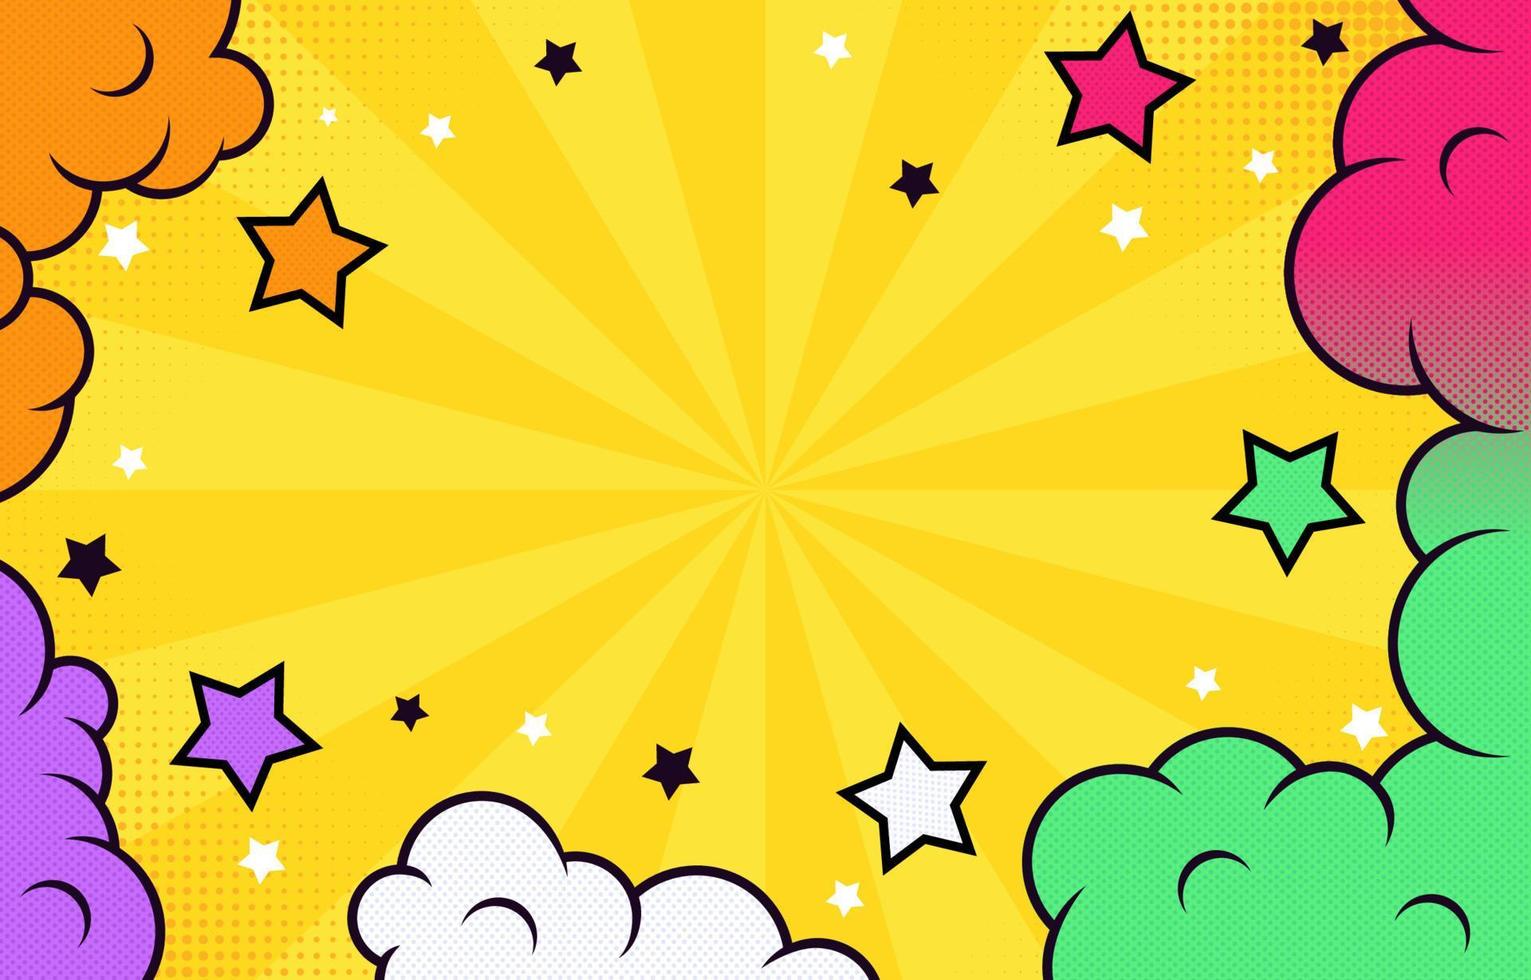 Colorful Stars And Clouds Pop Art Style vector